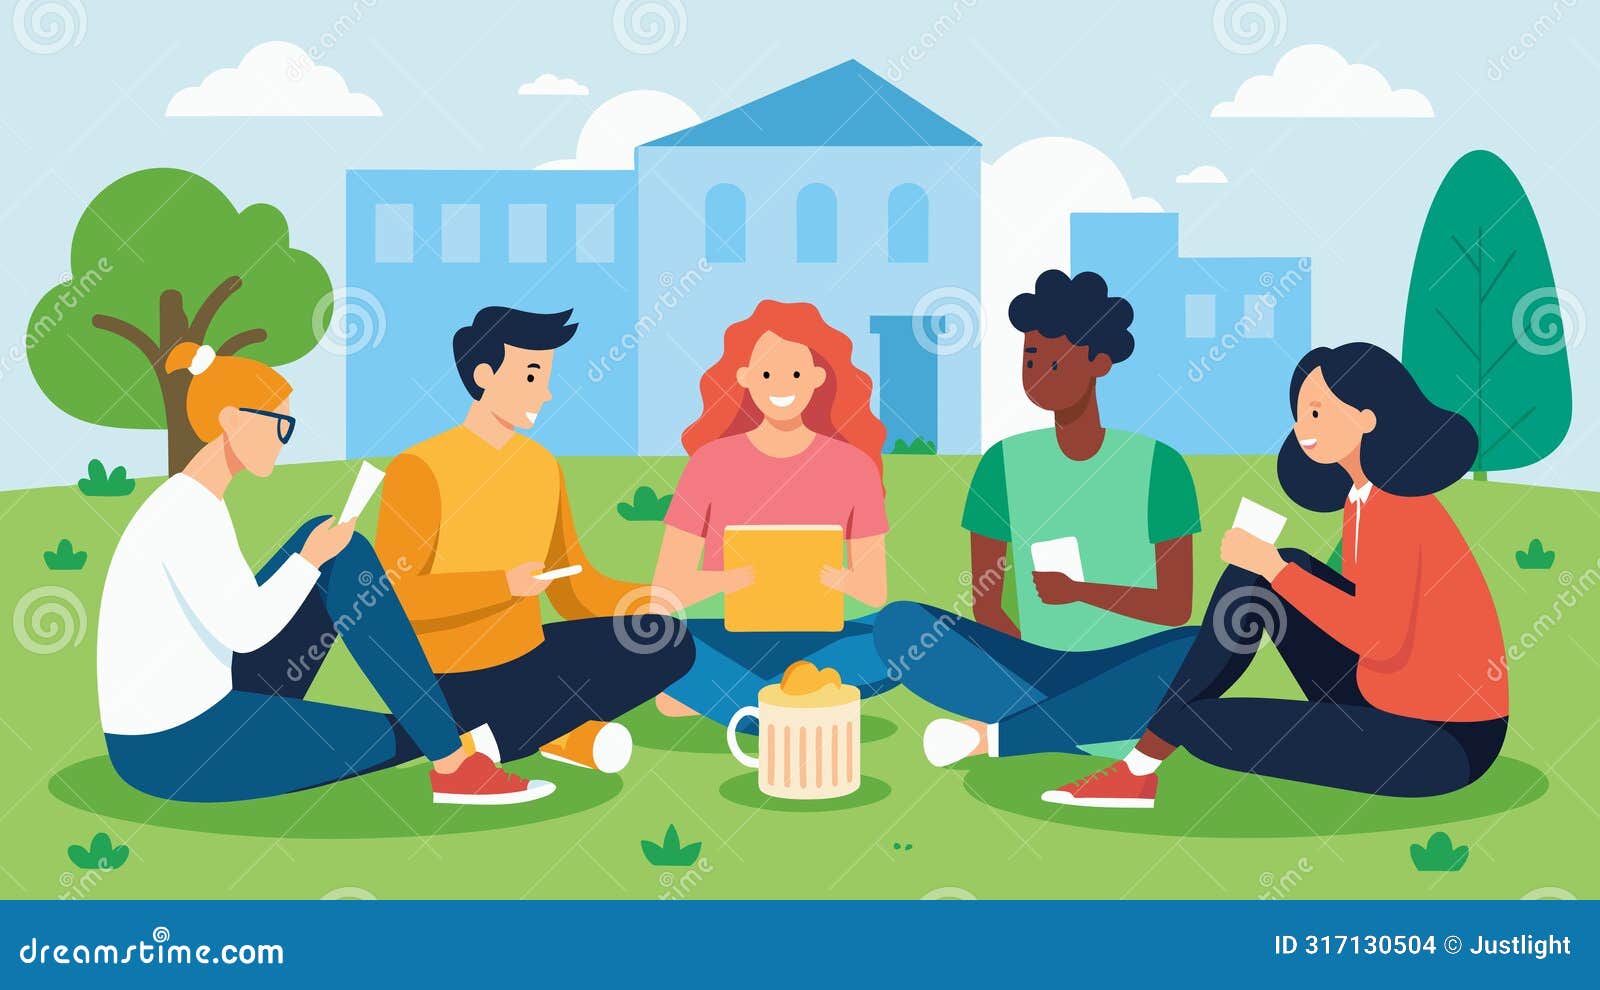 a group of friends sitting on a campus lawn trading ideas on how to minimize expenses while still having a social life